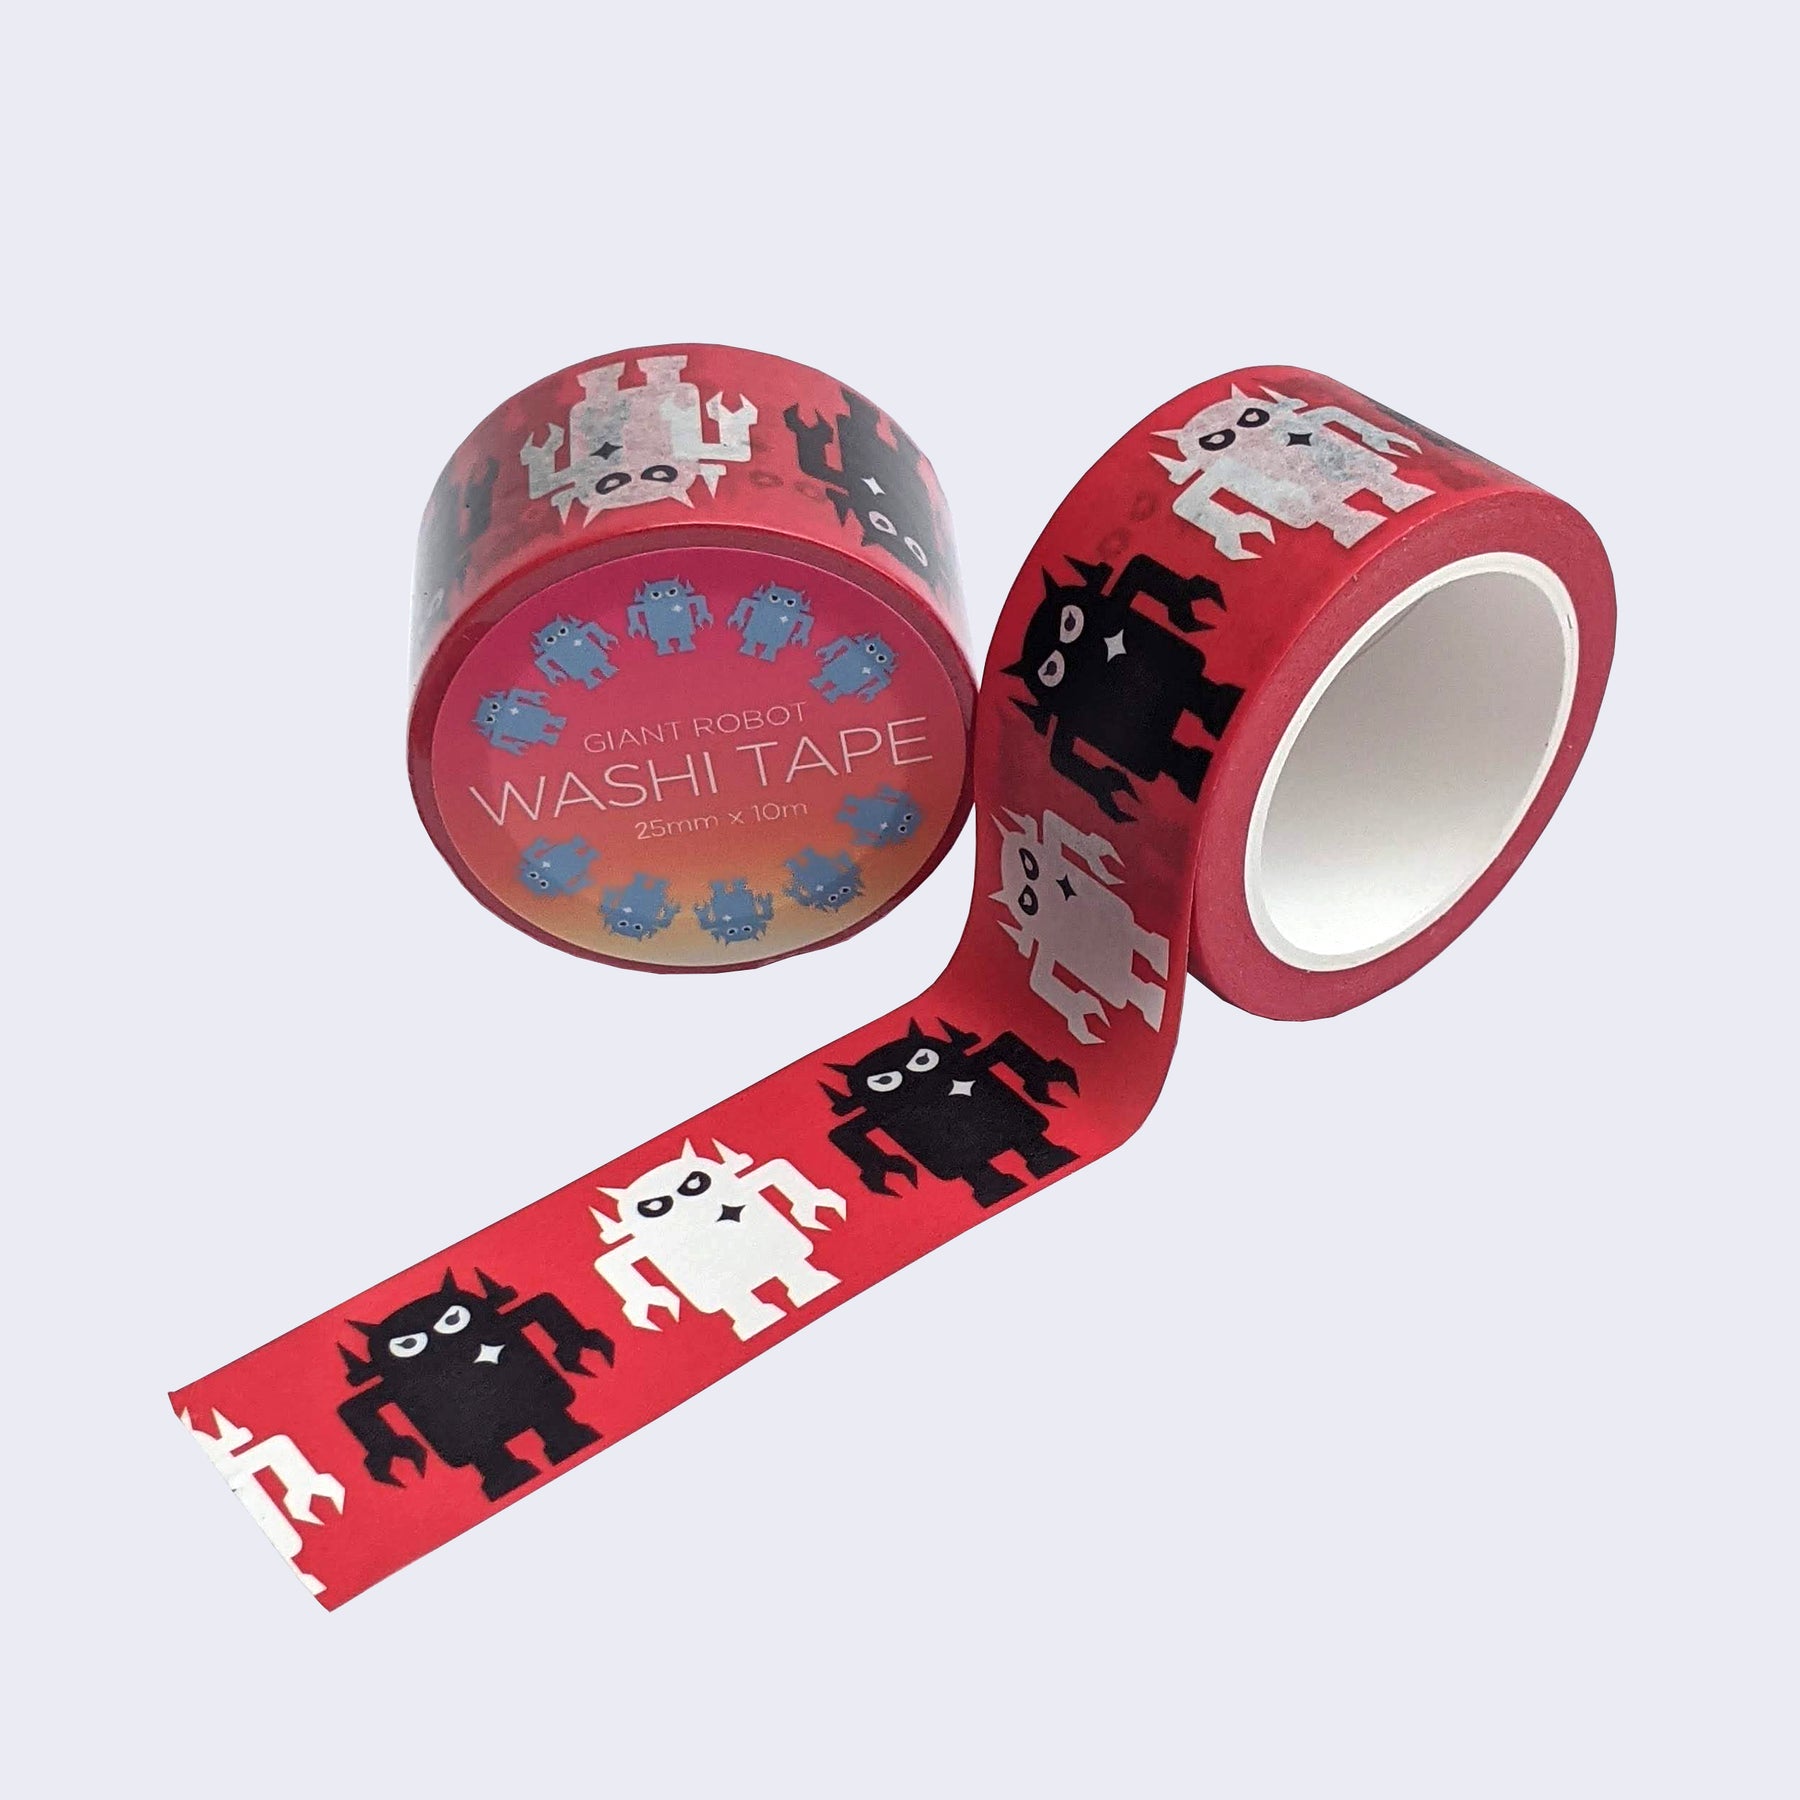 Giant Robot - 25mm Washi Tape Roll (Big Boss Black, White & Red